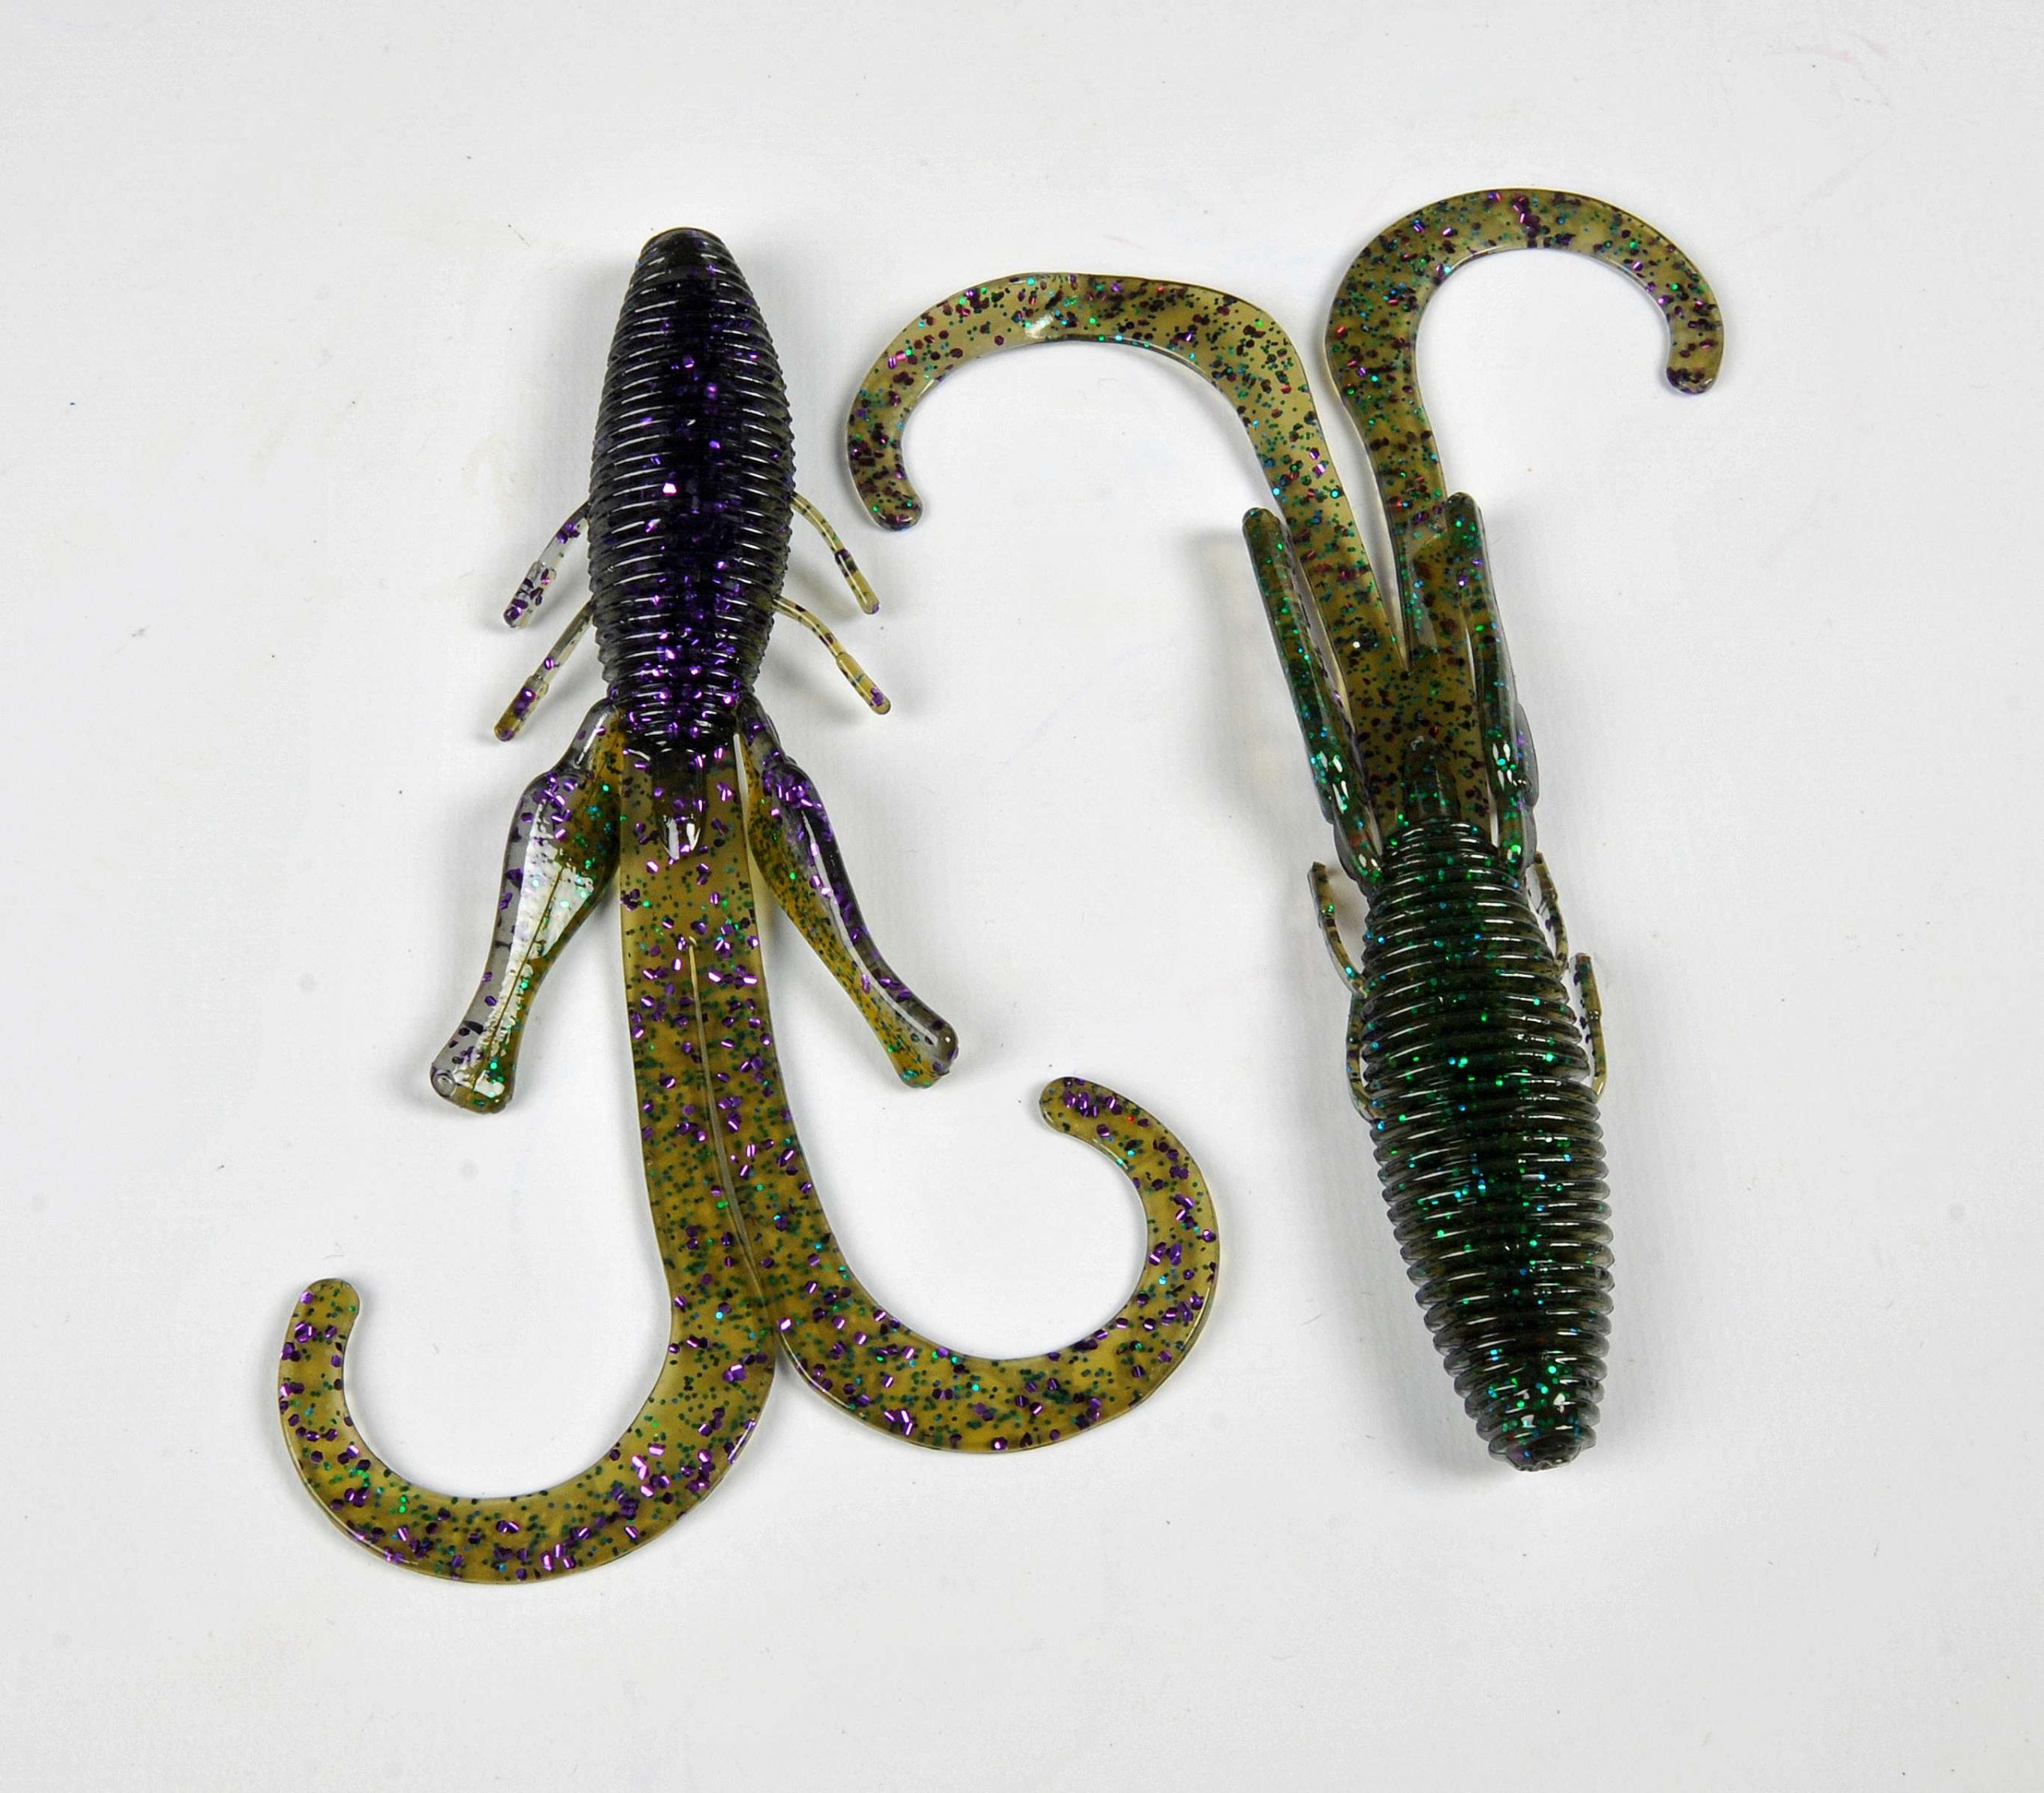 Hot Product Press: Missile Baits D-Stroyer - Bassmaster